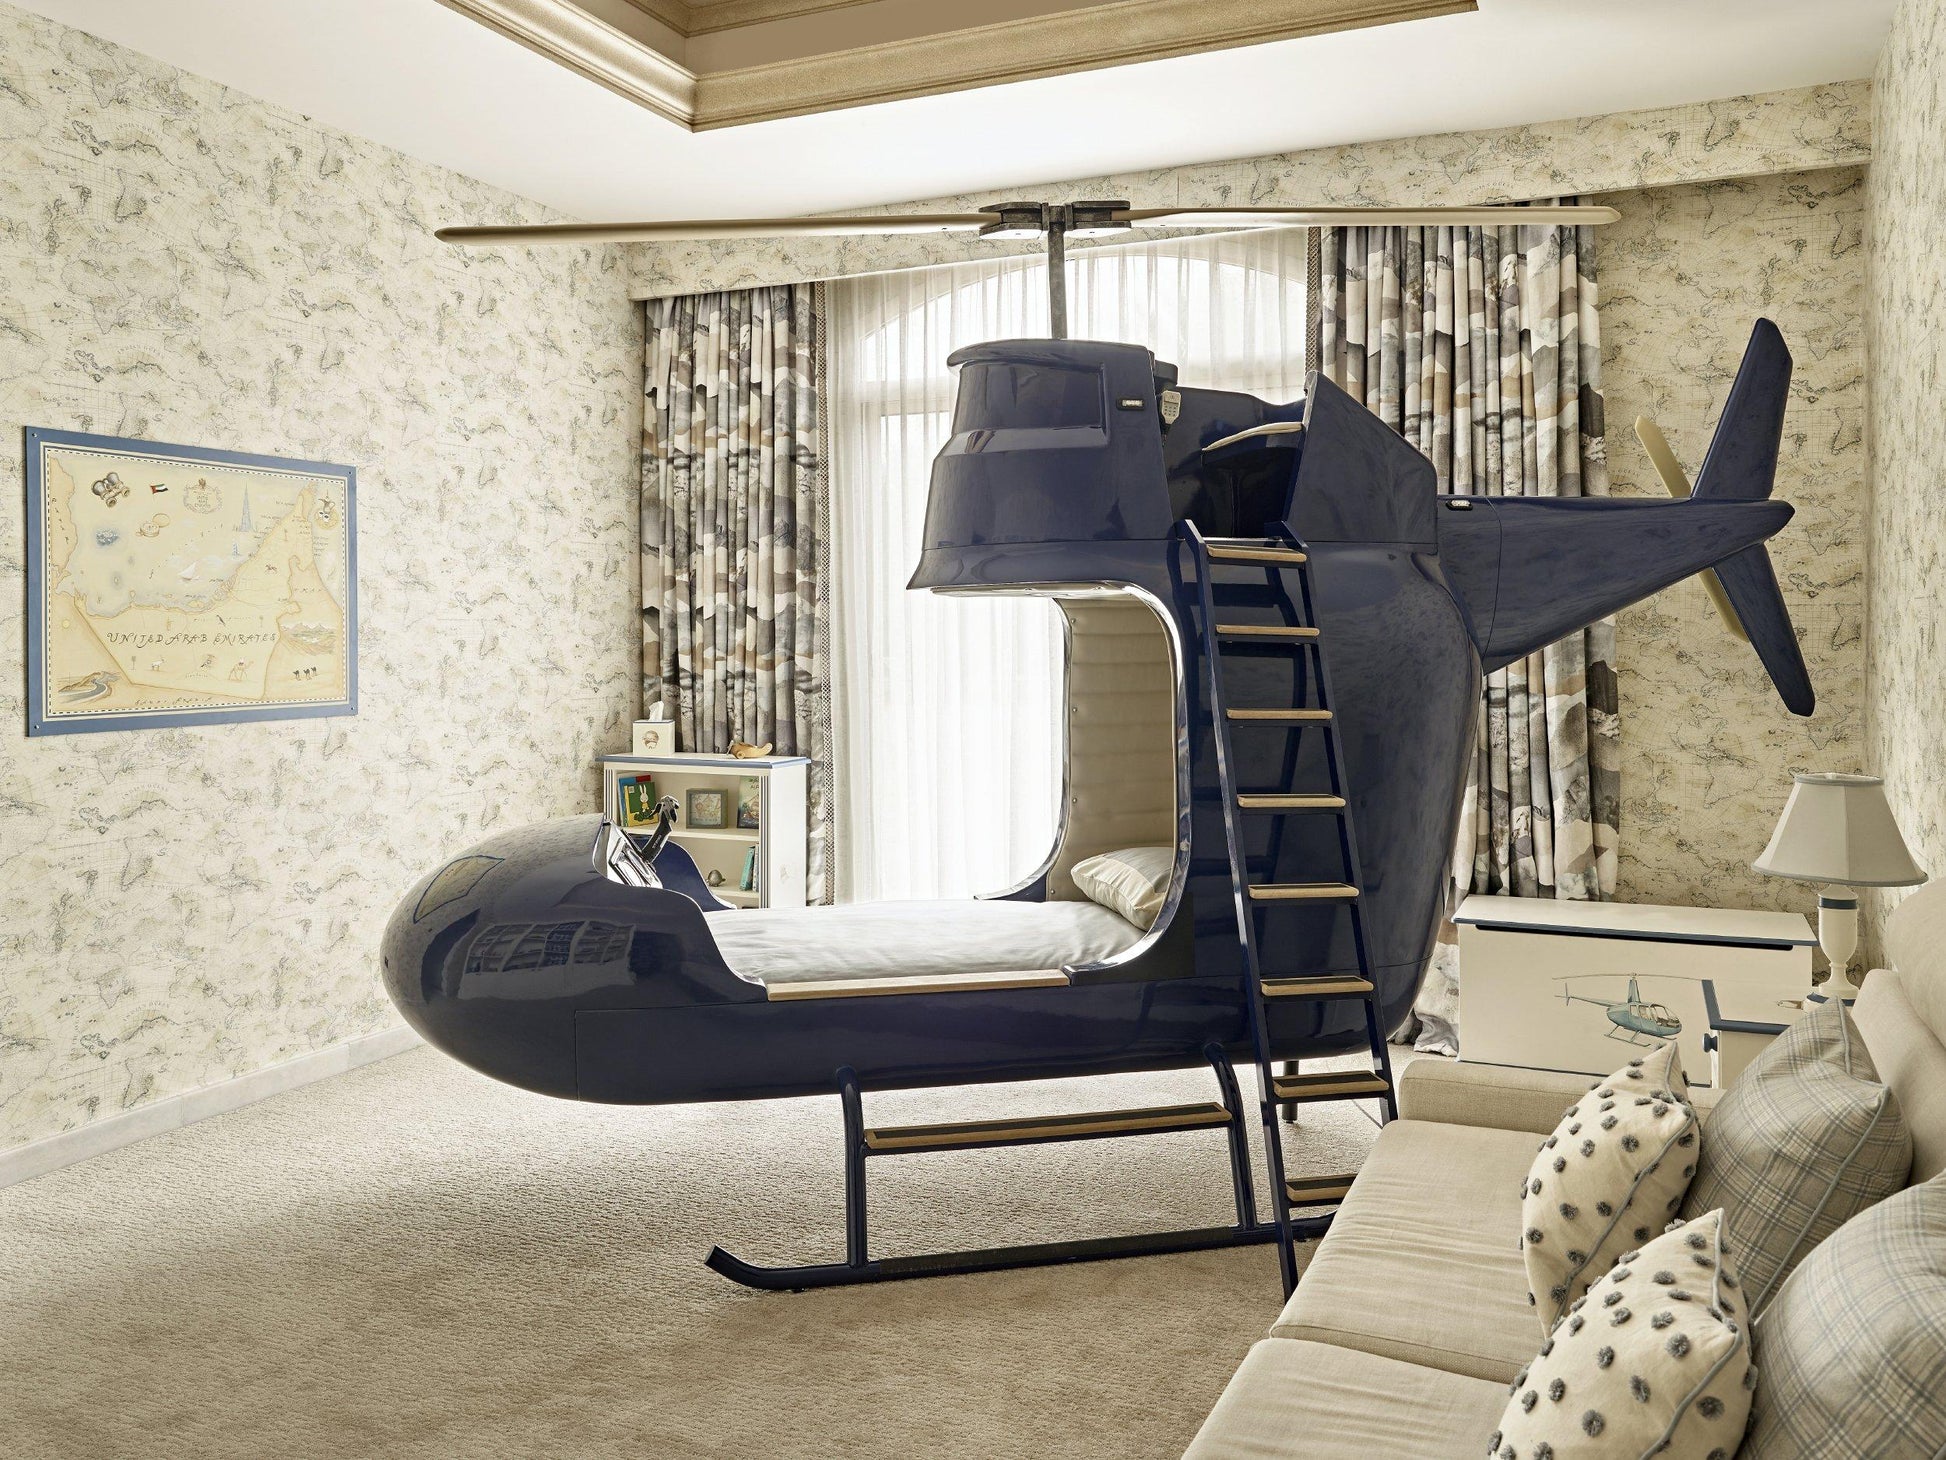 Dragons HB16 Helicopter Bed - Kids helicopter bed | Dragons of Walton Street